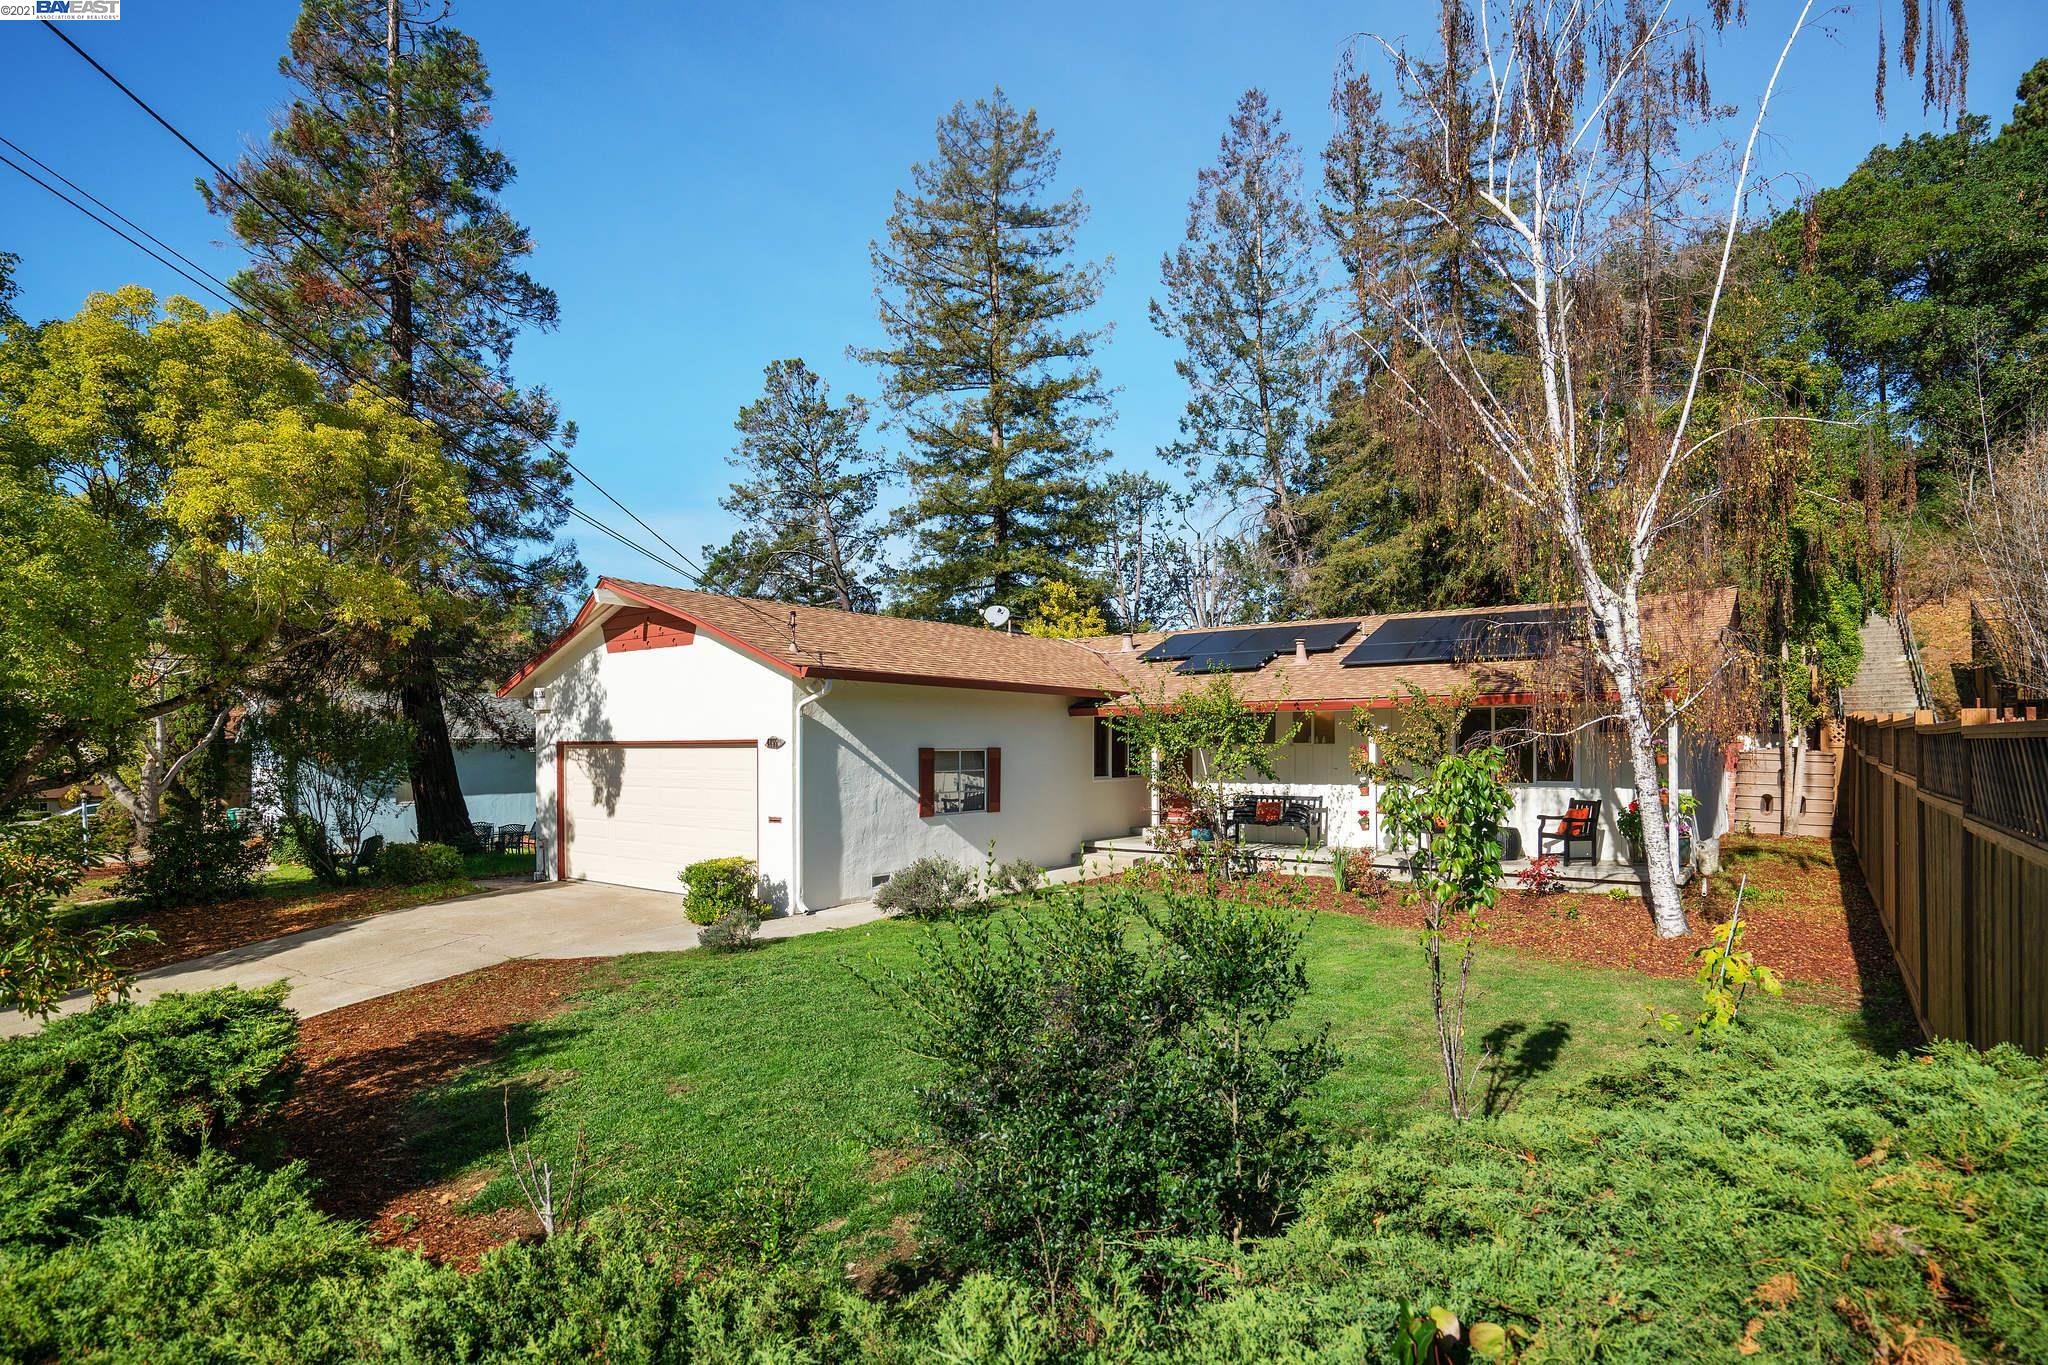 Resting in the Oakland hills Grass Valley neighborhood, surrounded by public  parklands, is this ranch-style 3 bedroom, 2 bath home, with a 2-car attached garage against a private hillside. Built in 1955 with quality construction, this home is approx. 1284 sq. ft. w/ a generous-sized 7625 sq. ft. lot. Ready to move in - freshly painted inside and out, beautiful hardwood floors that flow throughout the living room, dining area, bedrooms, and hallway. Energy efficient upgrades include: solar energy panels, dual pane windows, and a professionally installed vapor barrier. Also has a new garage door, 5-burner gas stove, dishwasher, vanity, toilet & bathroom floor. Surrounded by nature, it's located above Oakland Zoo & by Chabot Regional Park, Knowland State Arboretum & Park, Lake Chabot Municipal Golf Course & Sequoyah Country Club. Up the street is the Clyde Woolridge Staging Area (parking lot) w/ hiking trails to Miller Creek and the Upper San Leandro Reservoir. Easy access to 580.